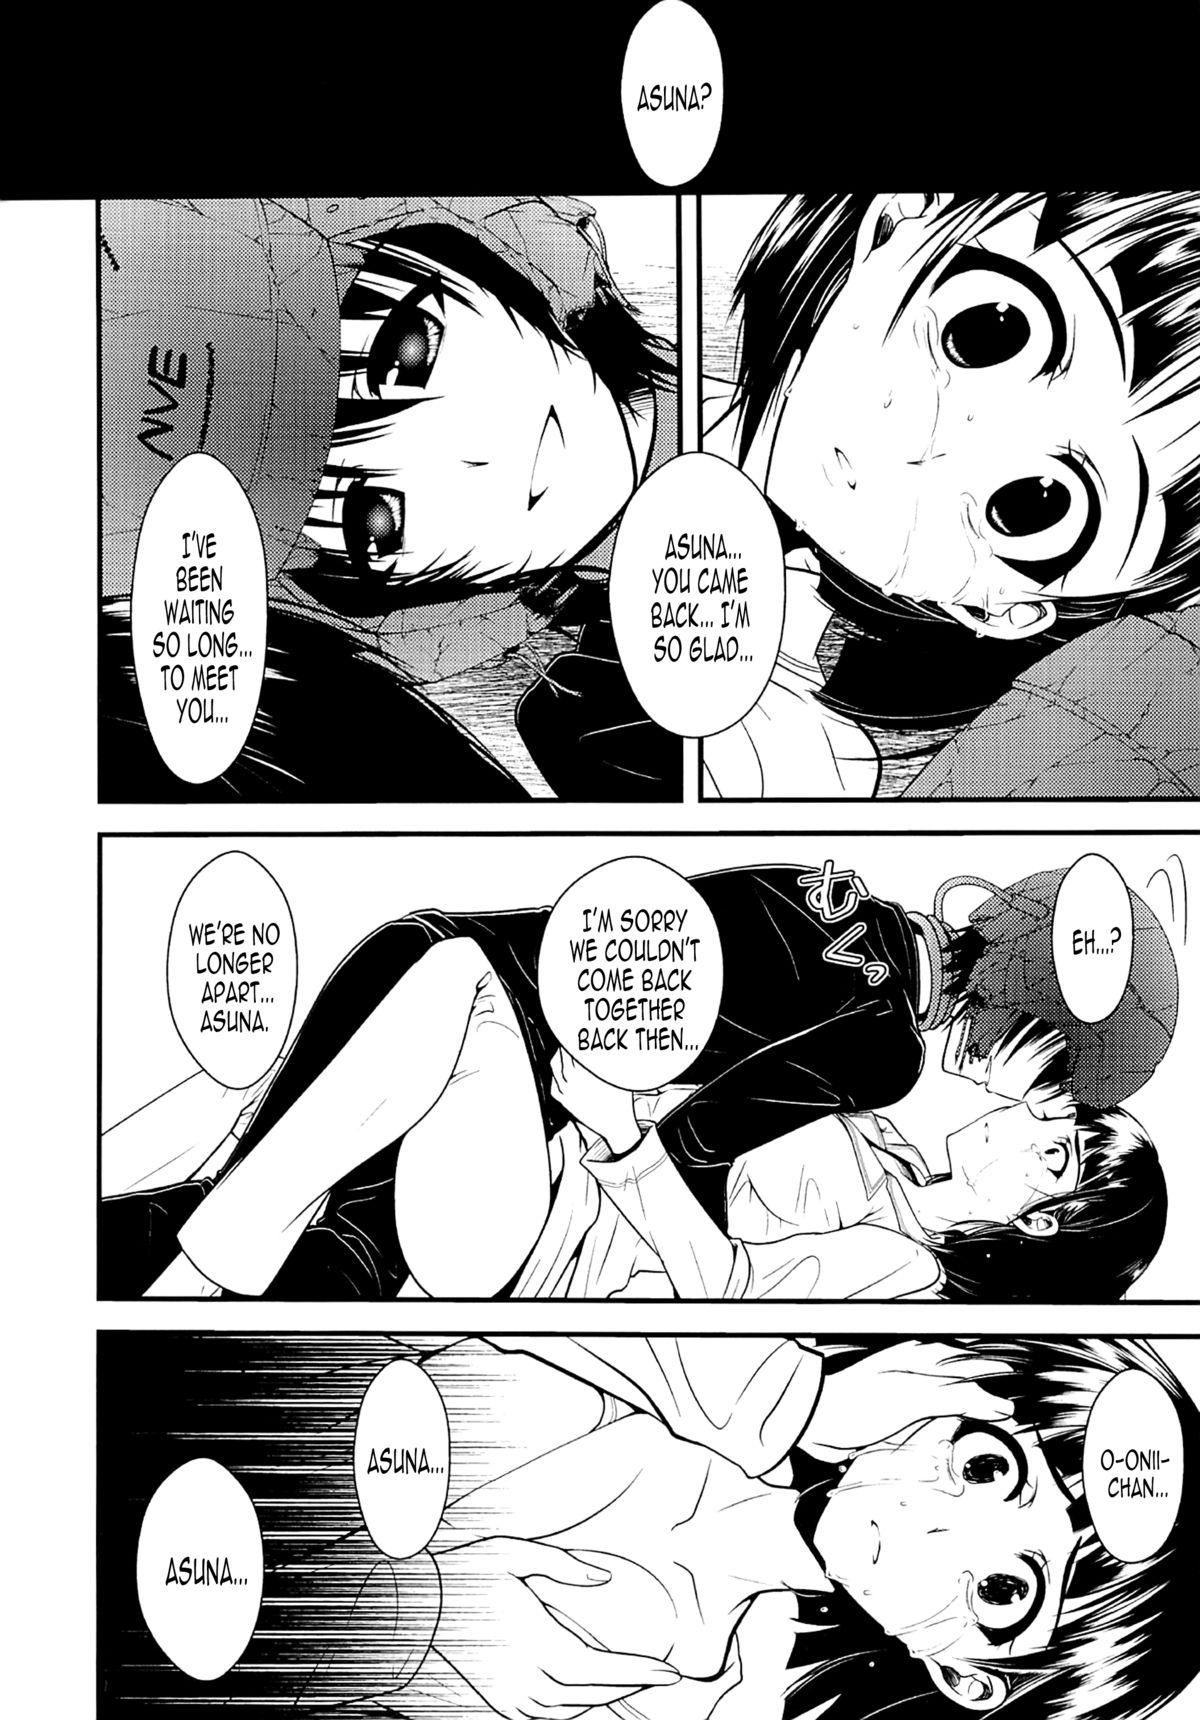 Topless Wakuraba Ochite Kimi Idaku Hibi | The Days the Blighted Leaves Fell, and I Embraced You - Sword art online Doggystyle Porn - Page 11